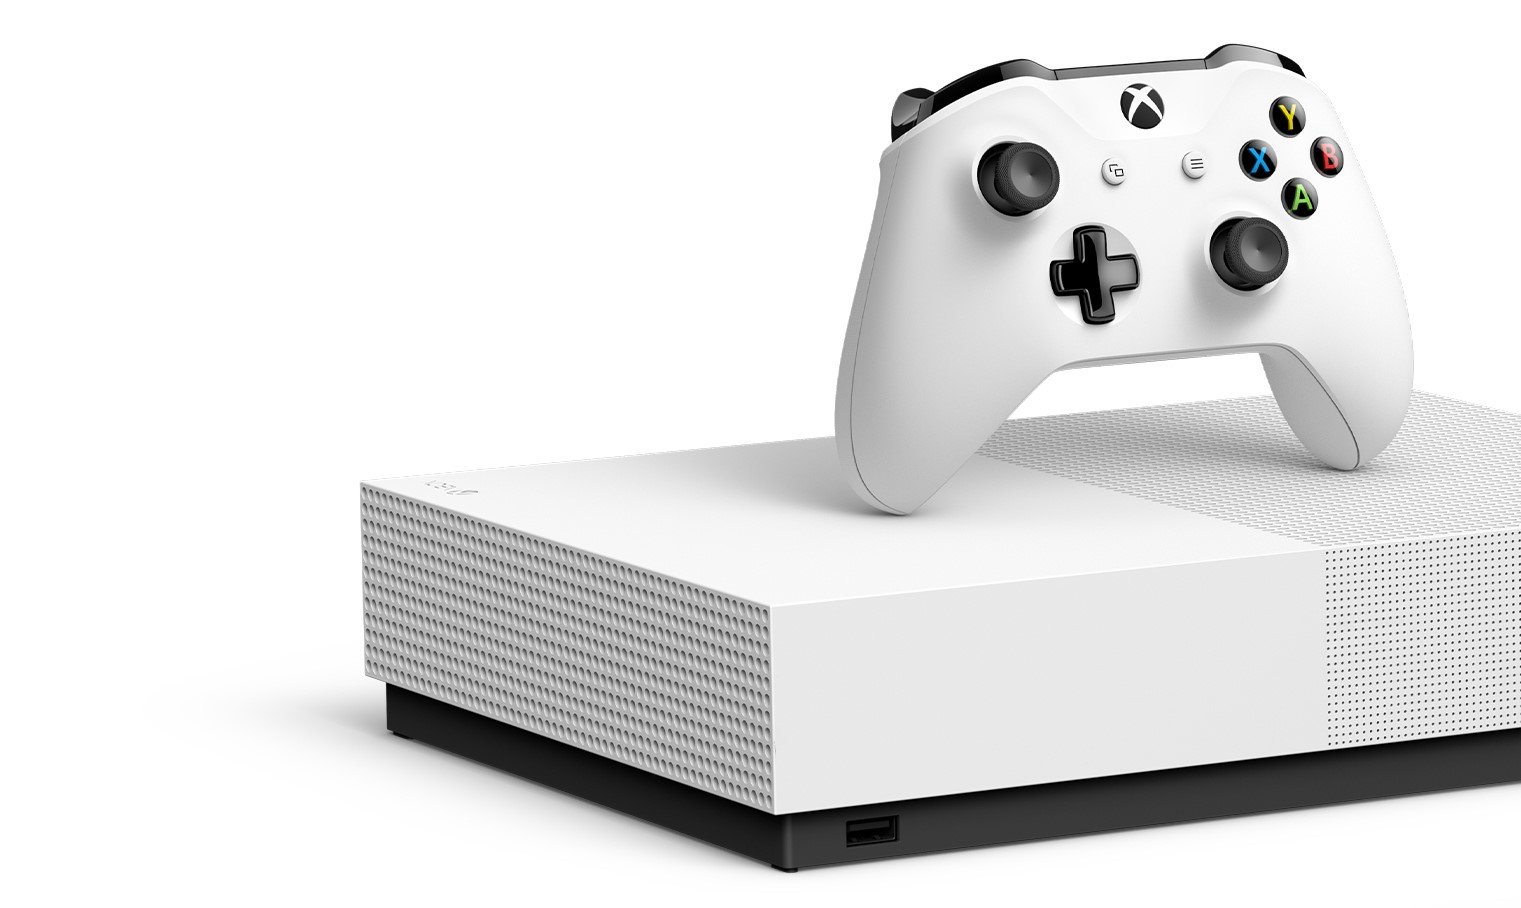 Xbox One S All-Digital Edition is now available for $249